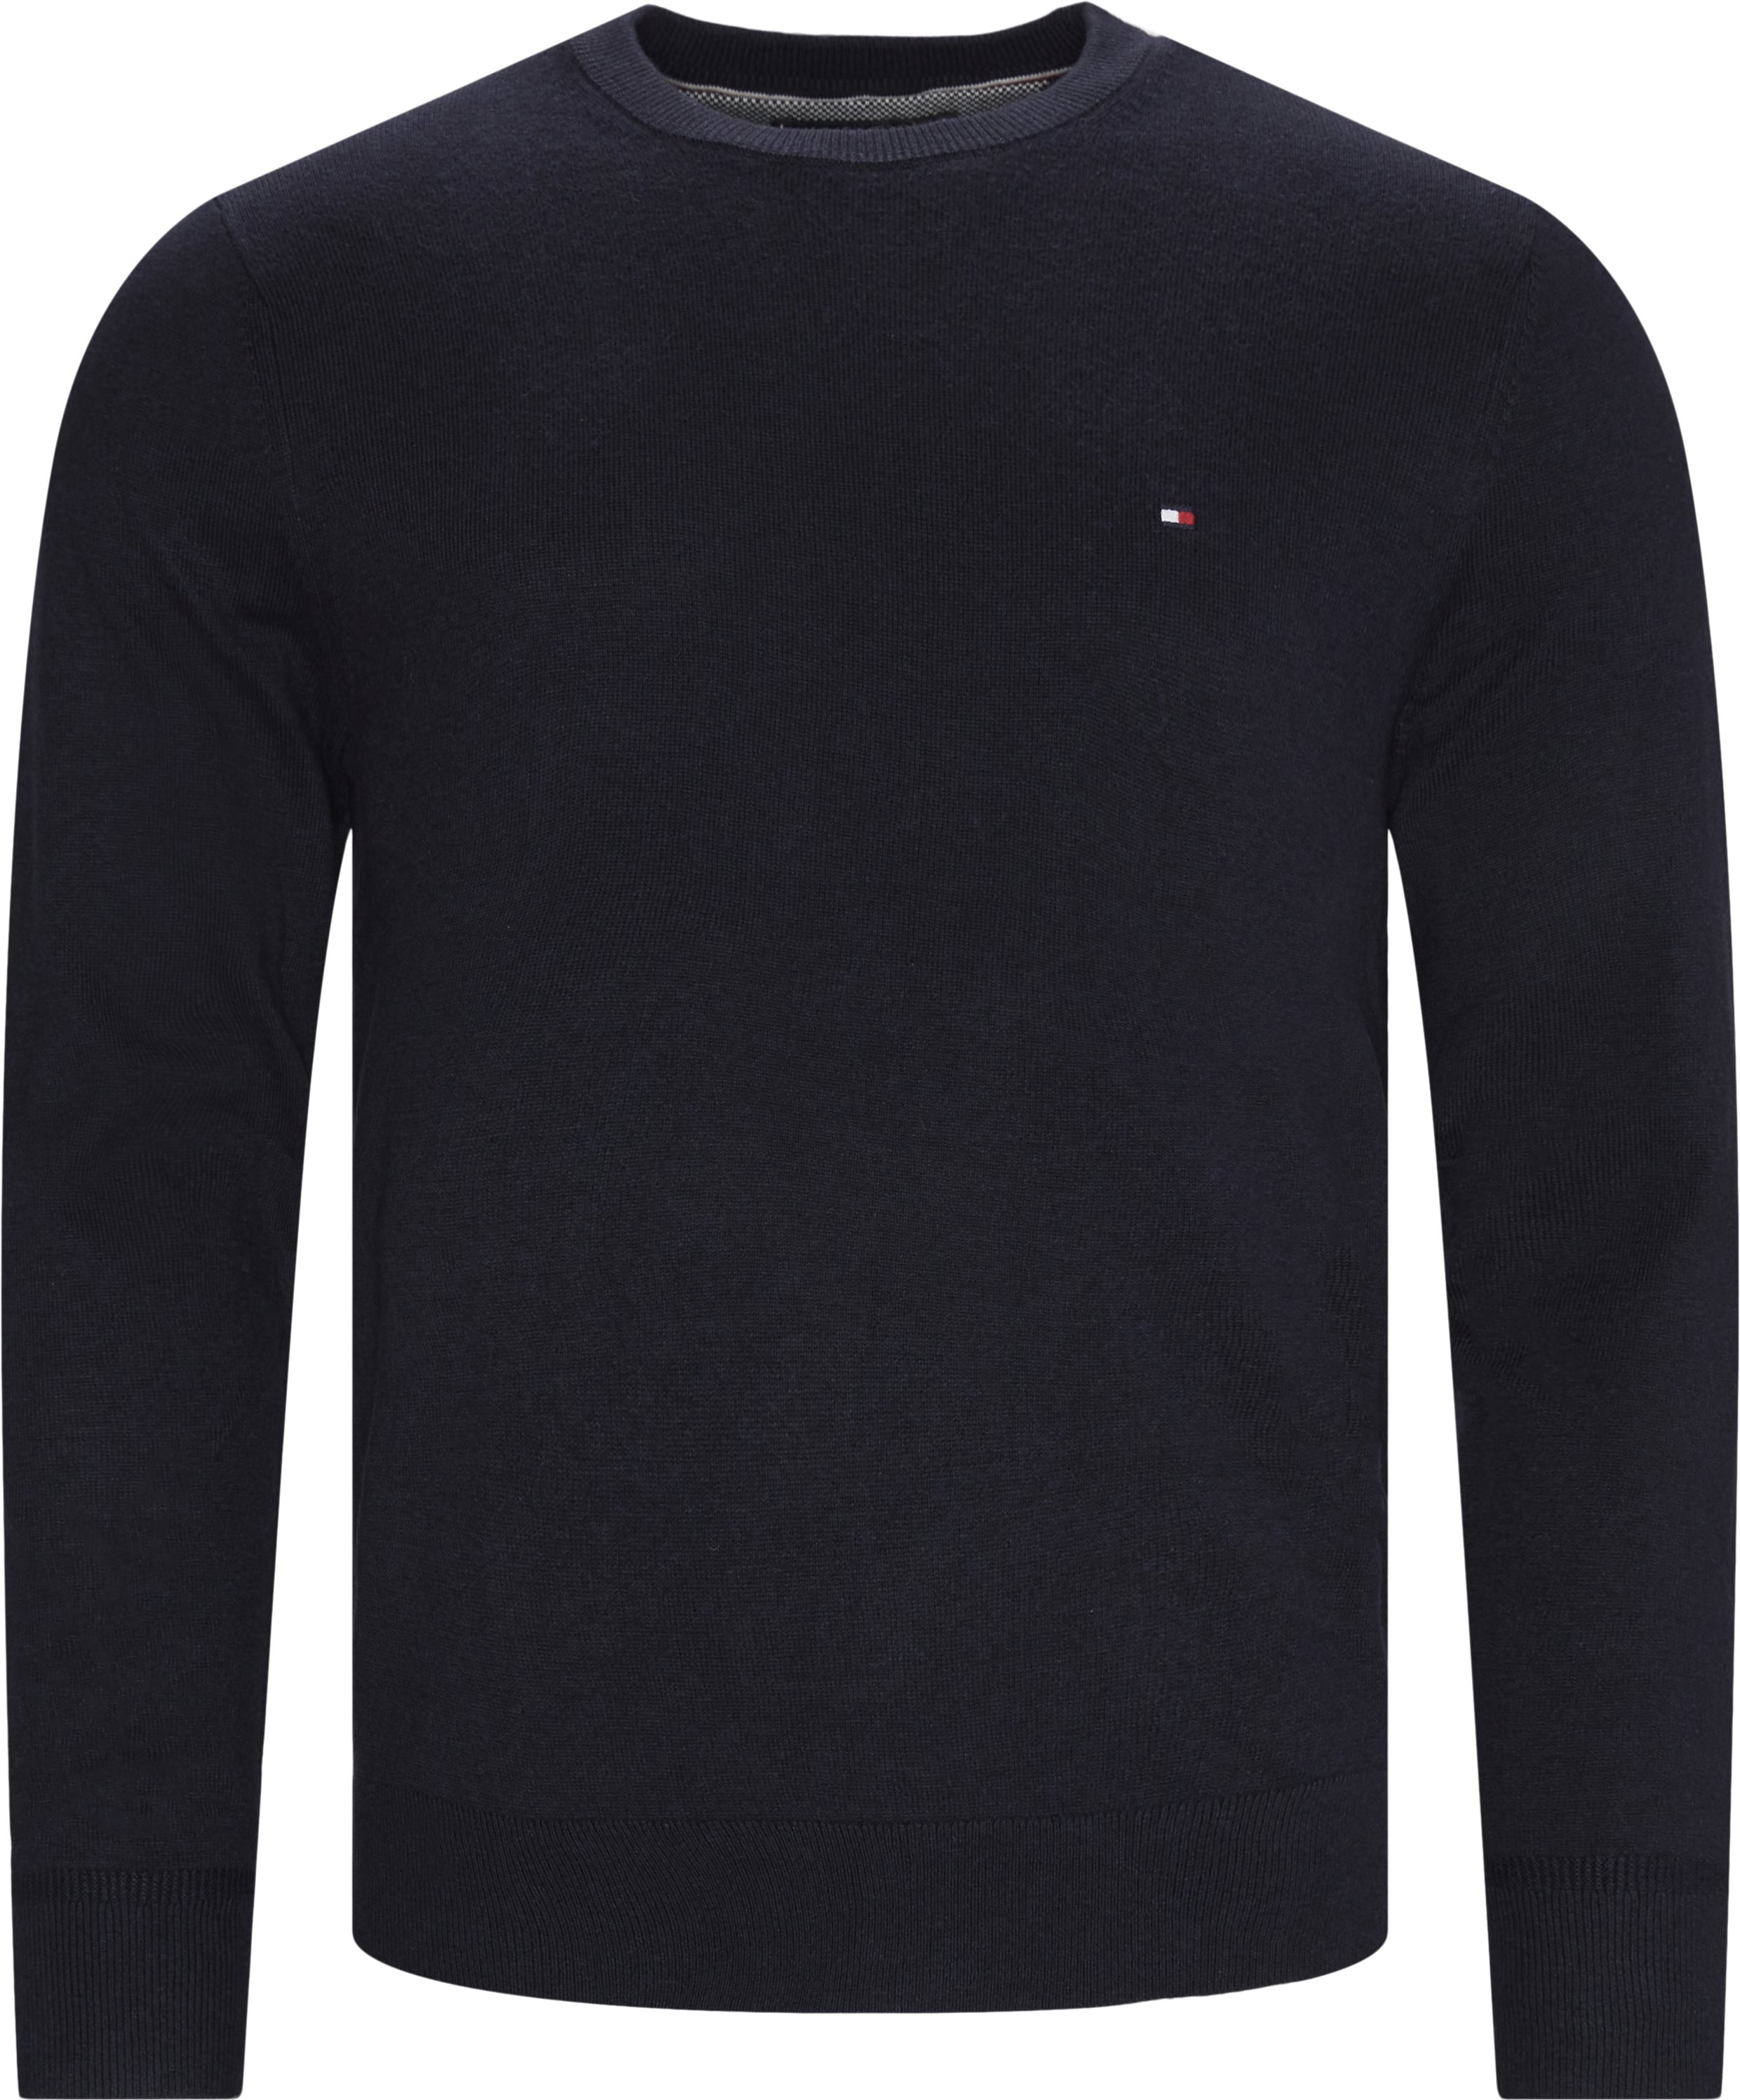 11674 PIMA EUR Tommy 60 Knitwear Hilfiger CASHMERE COTTON NAVY from